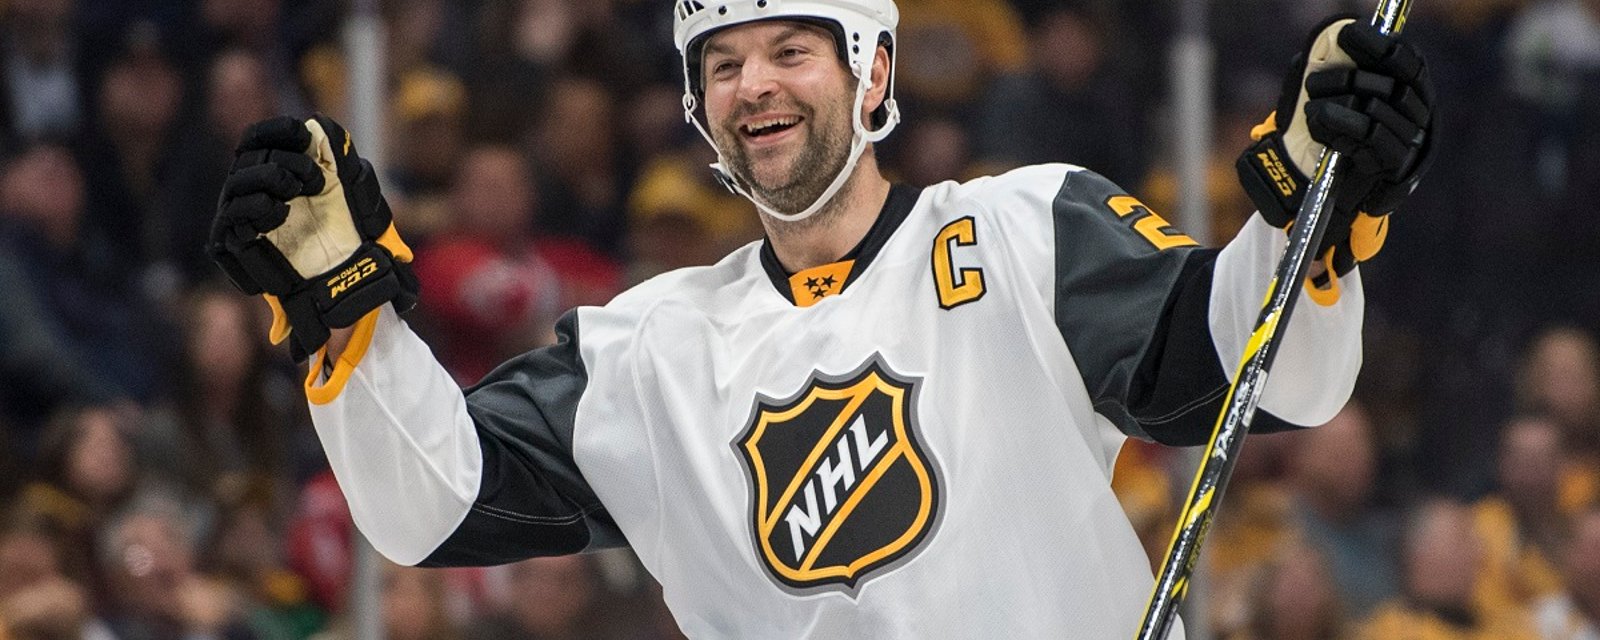 John Scott sends hilarious message to the players who weren't drafted at the 2019 NHL Draft.